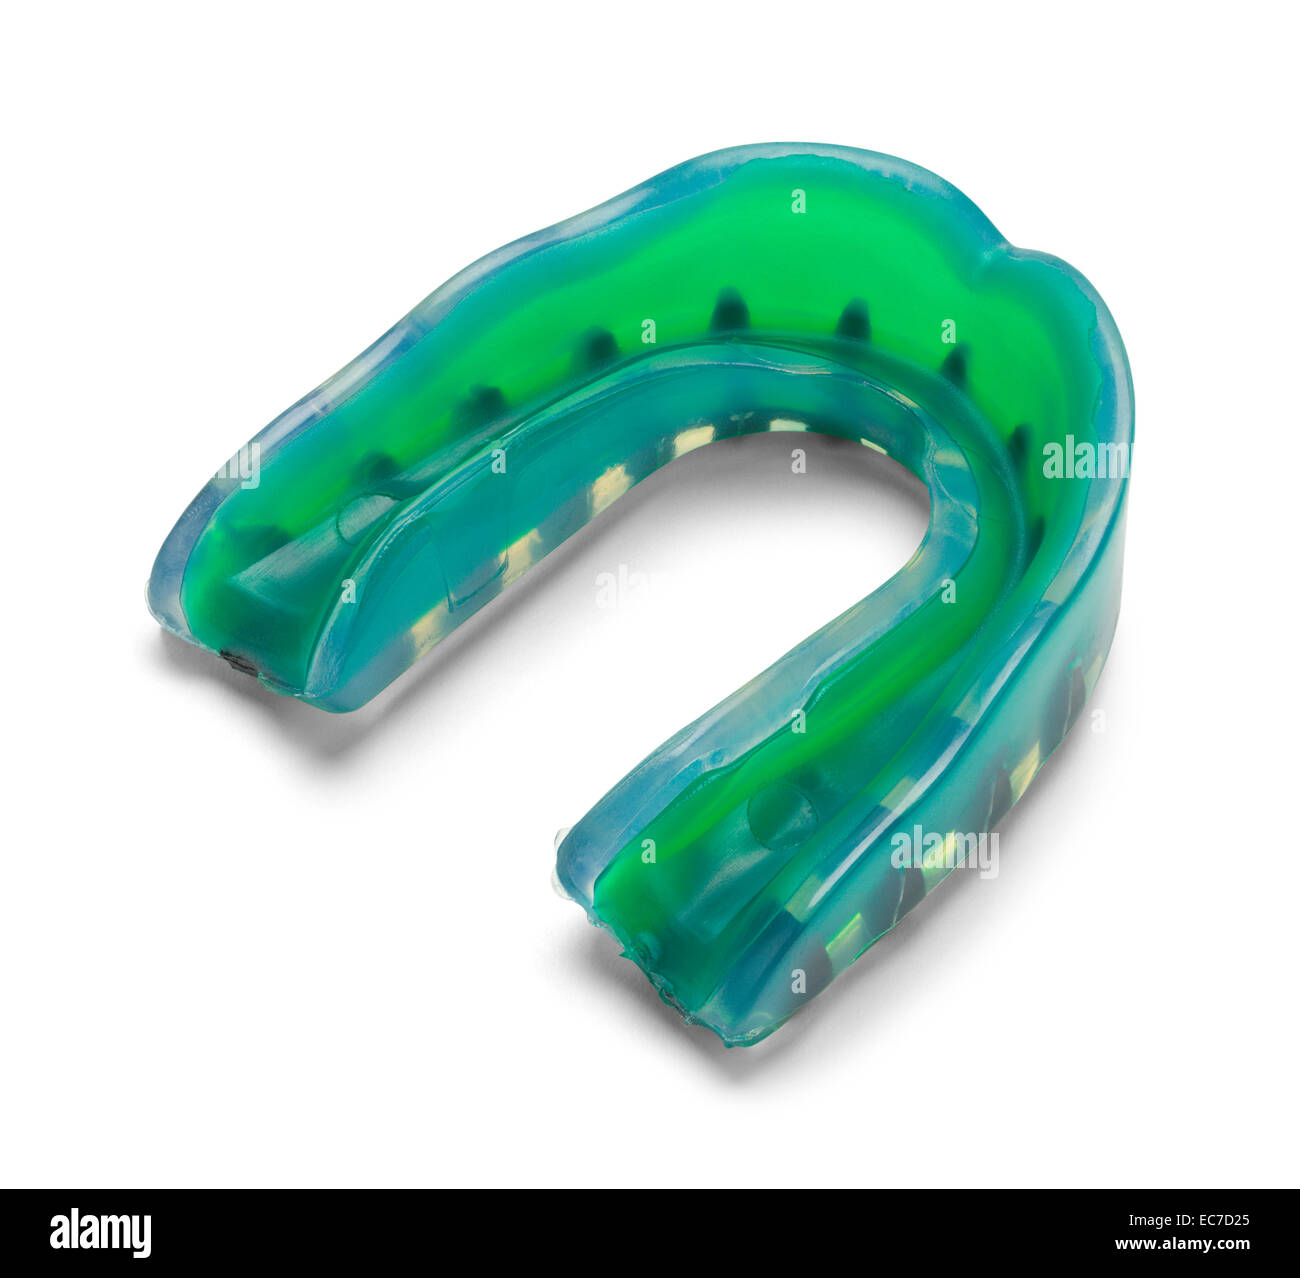 New Green Rubber Sports Mouth Guard Isolated on White Background. Stock Photo